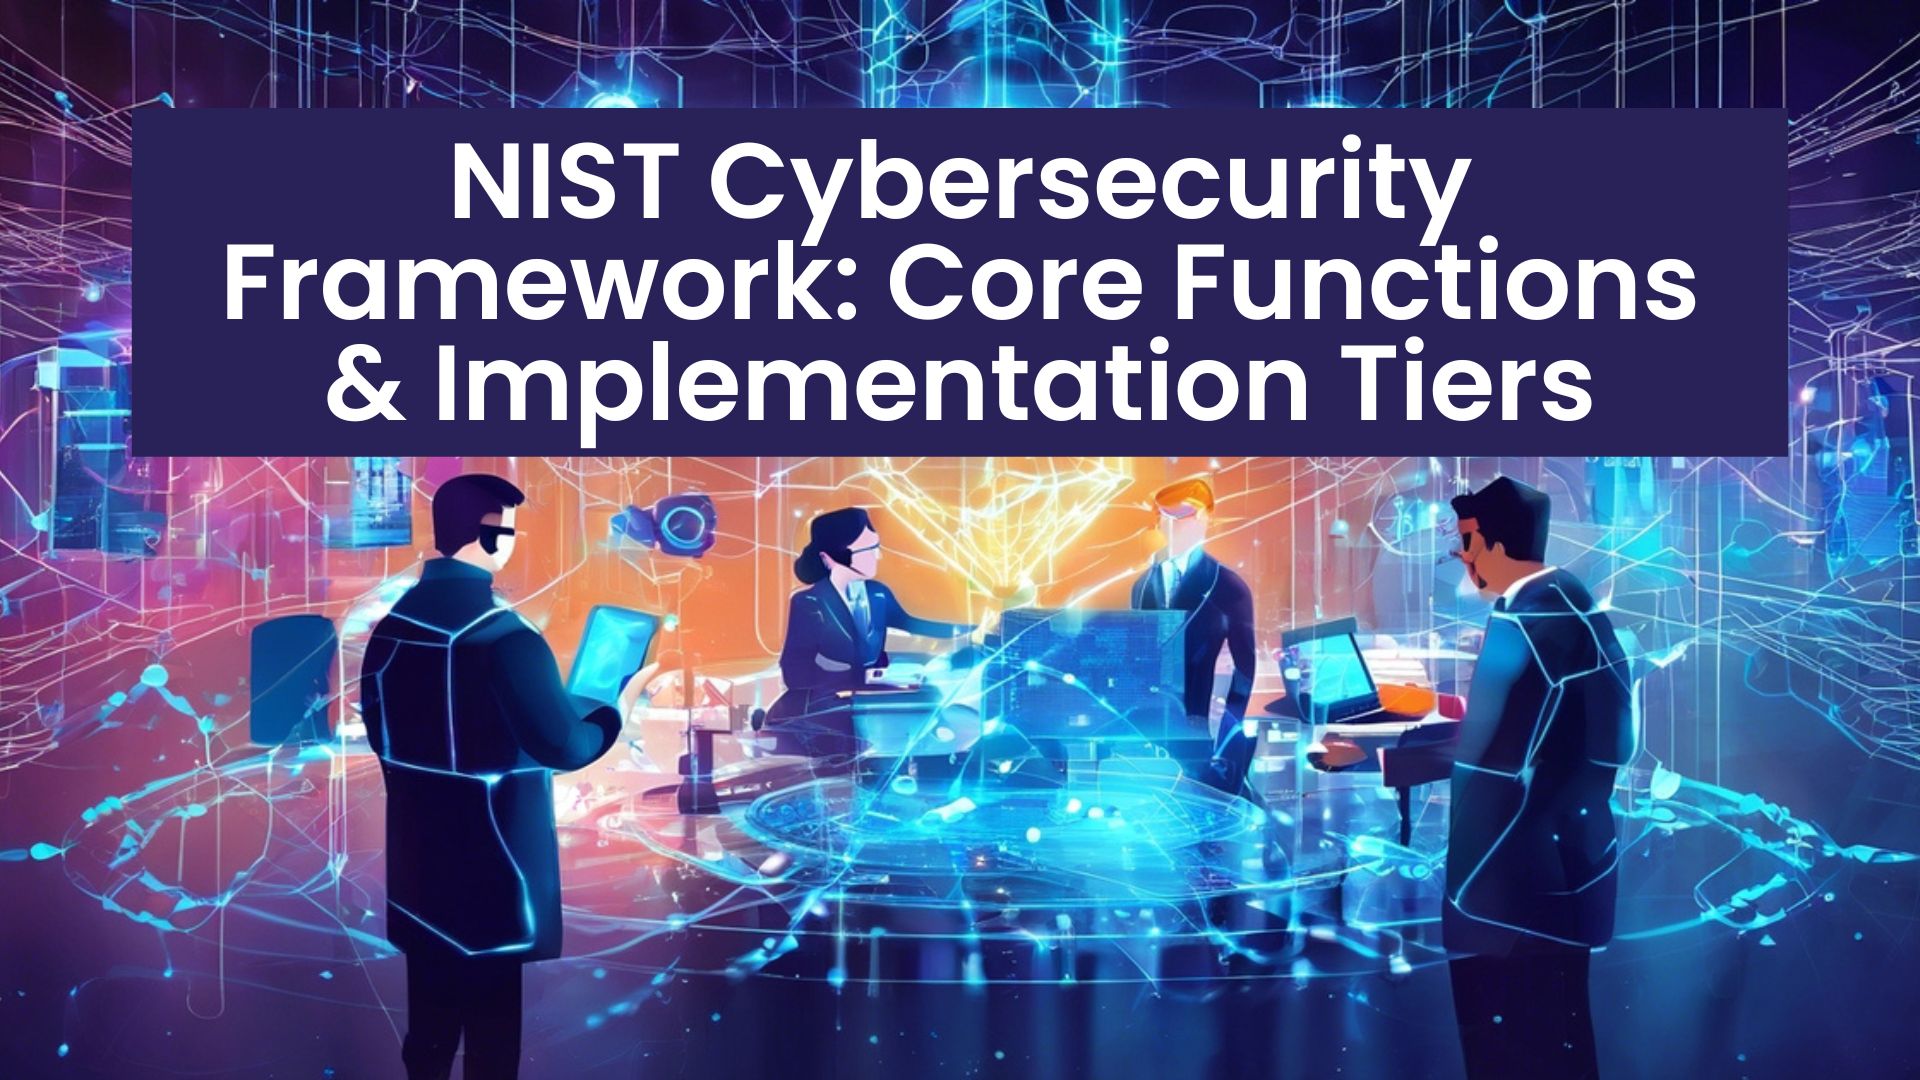 NIST Cybersecurity Framework Core Functions & Implementation Tiers